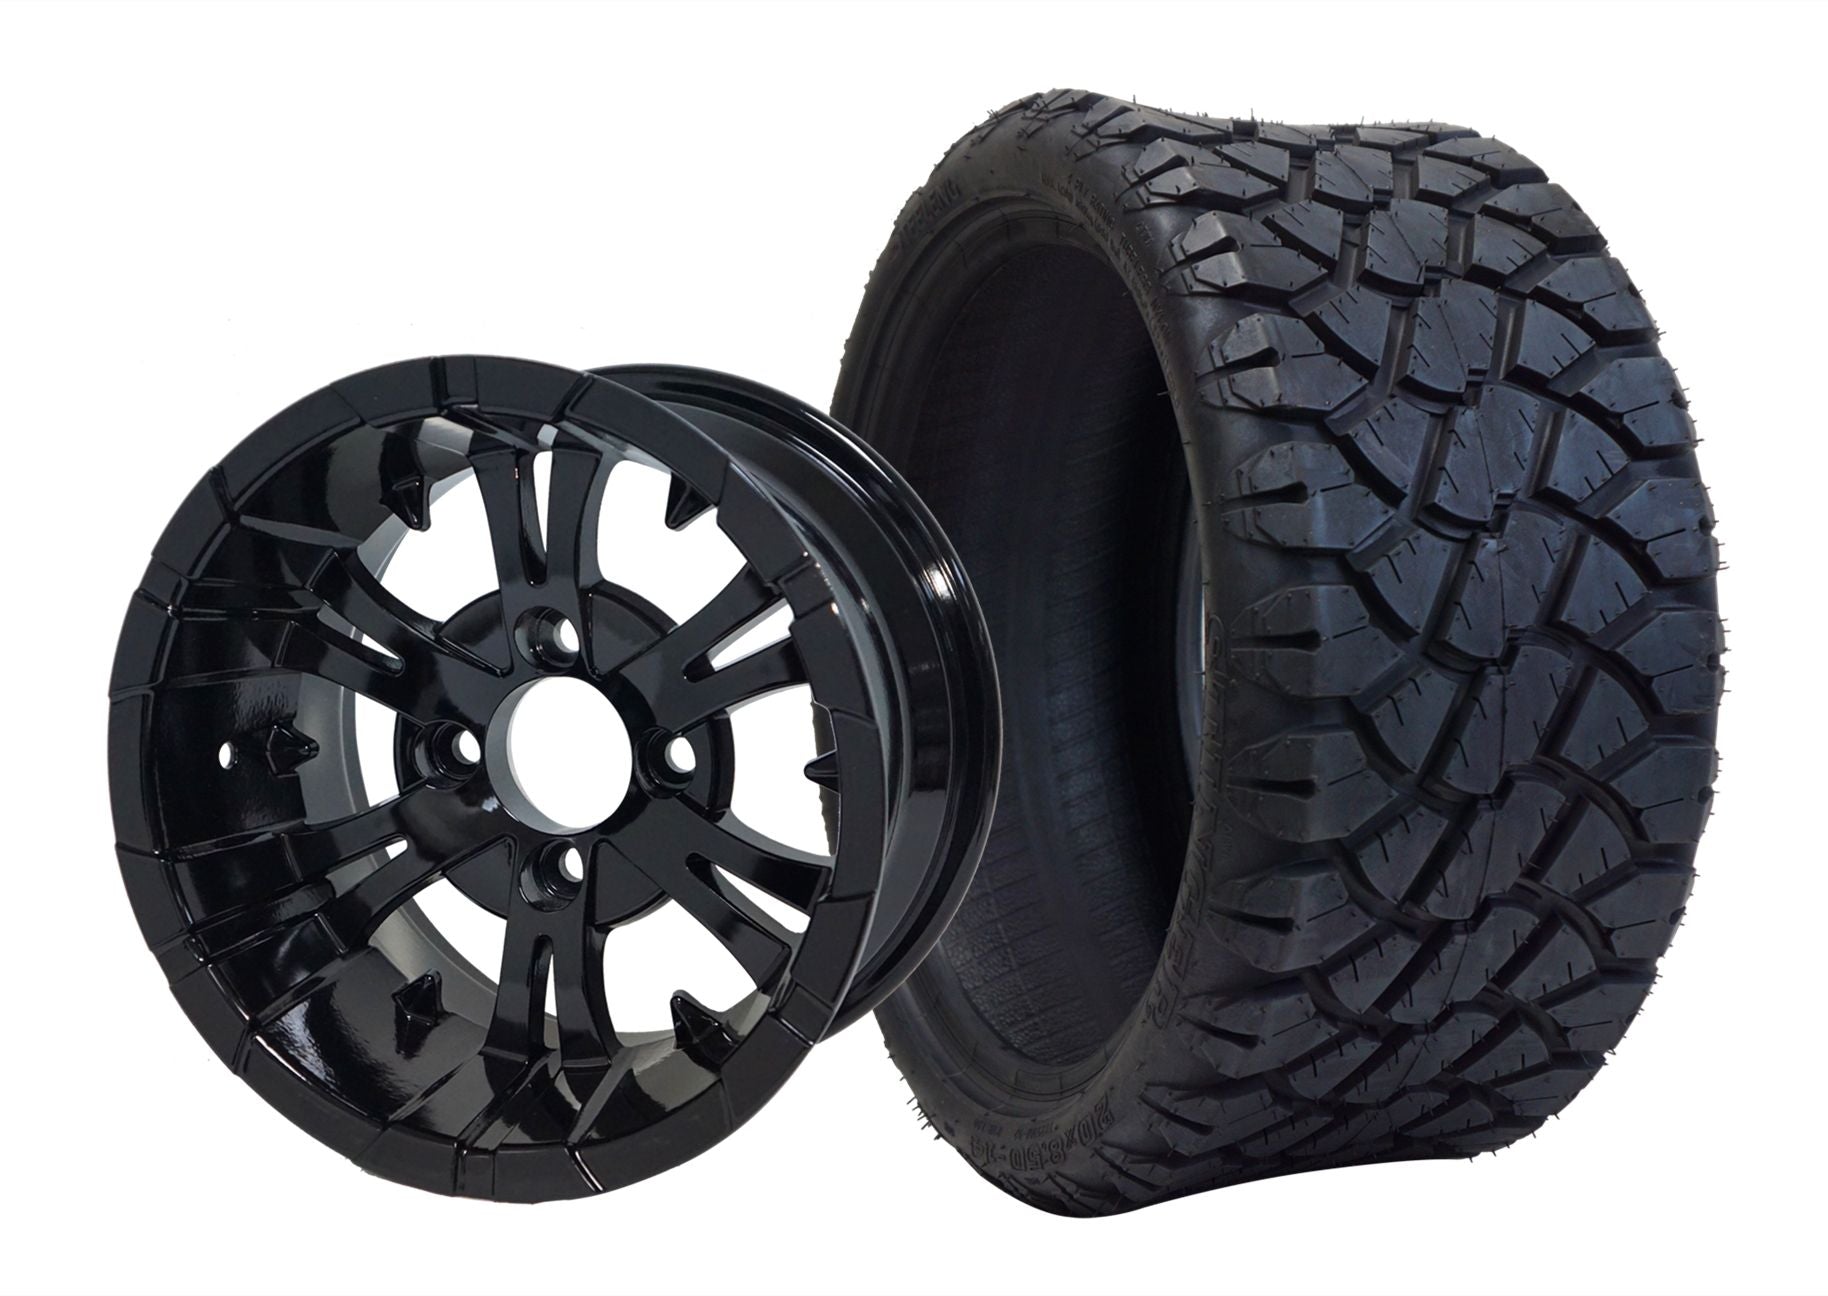 SGC 14" x 7" Vampire Glossy Black Wheel - Aluminum Alloy STEELENG 20"x8.5"-14" STINGER AT Tire DOT approved WH1414-TR1402